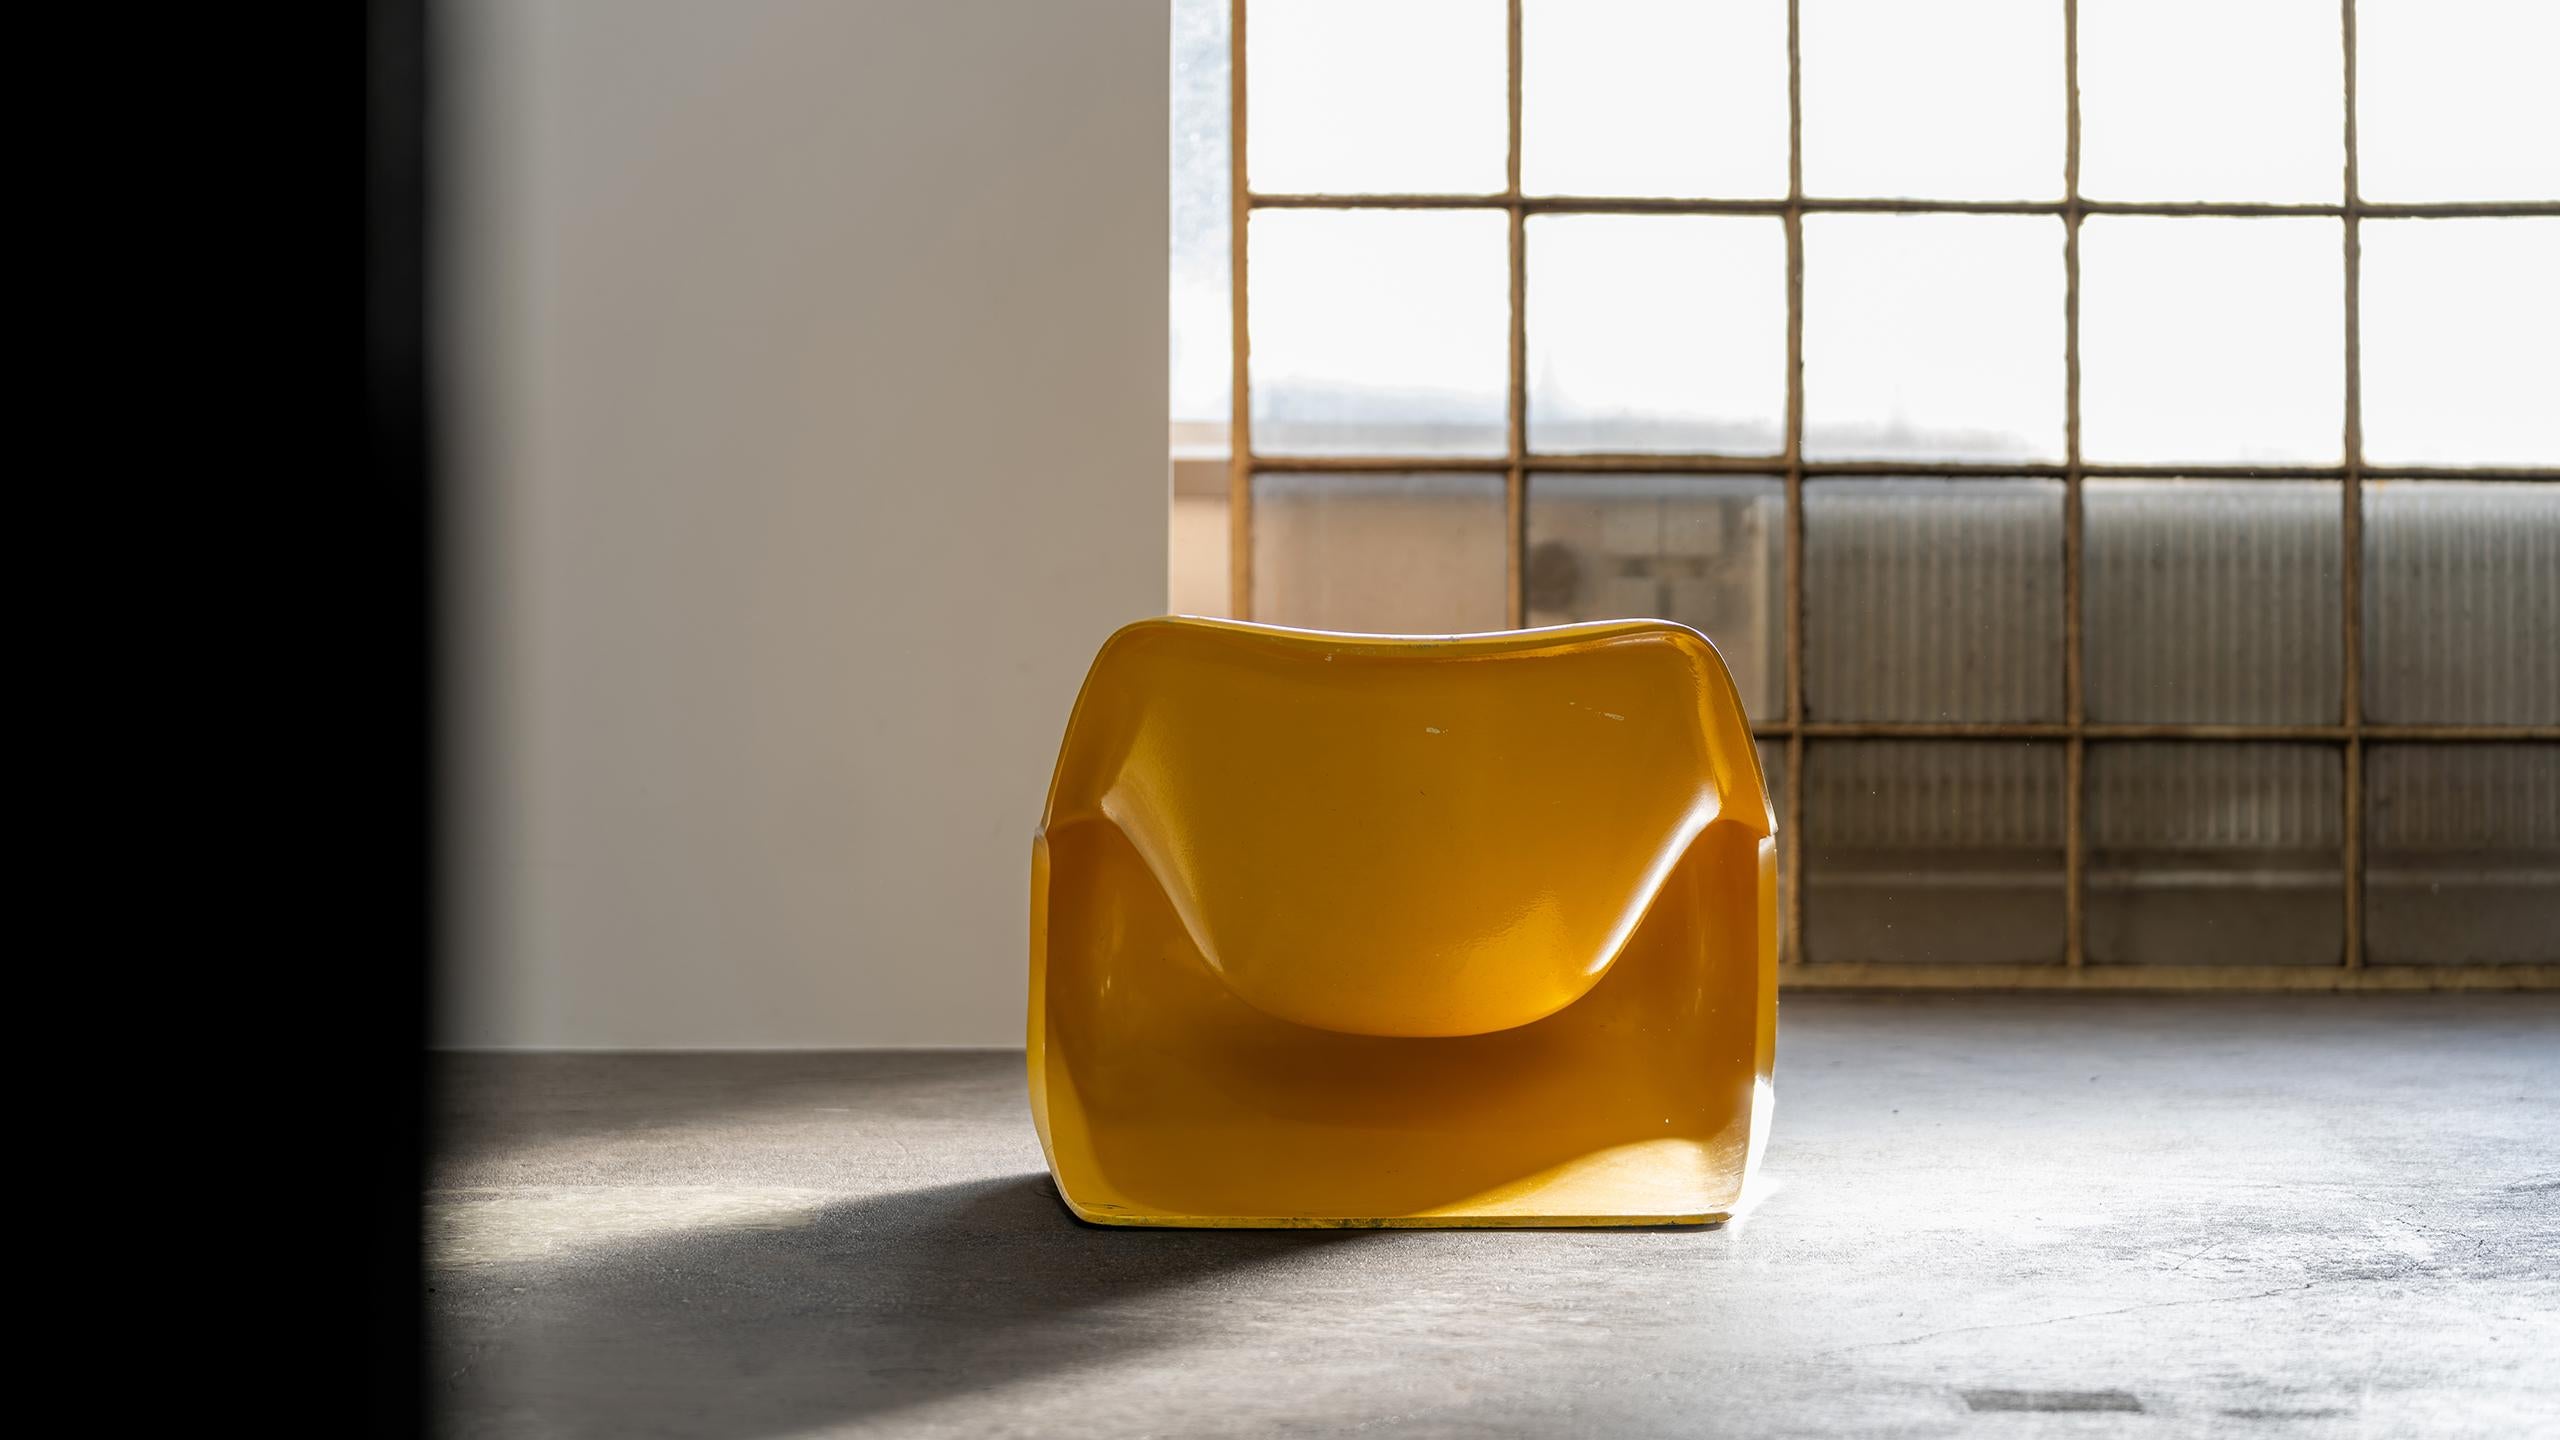 Late 20th Century Targa Chair by Klaus Uredat, 19709 for Horn Collection, Germany - Organic Design